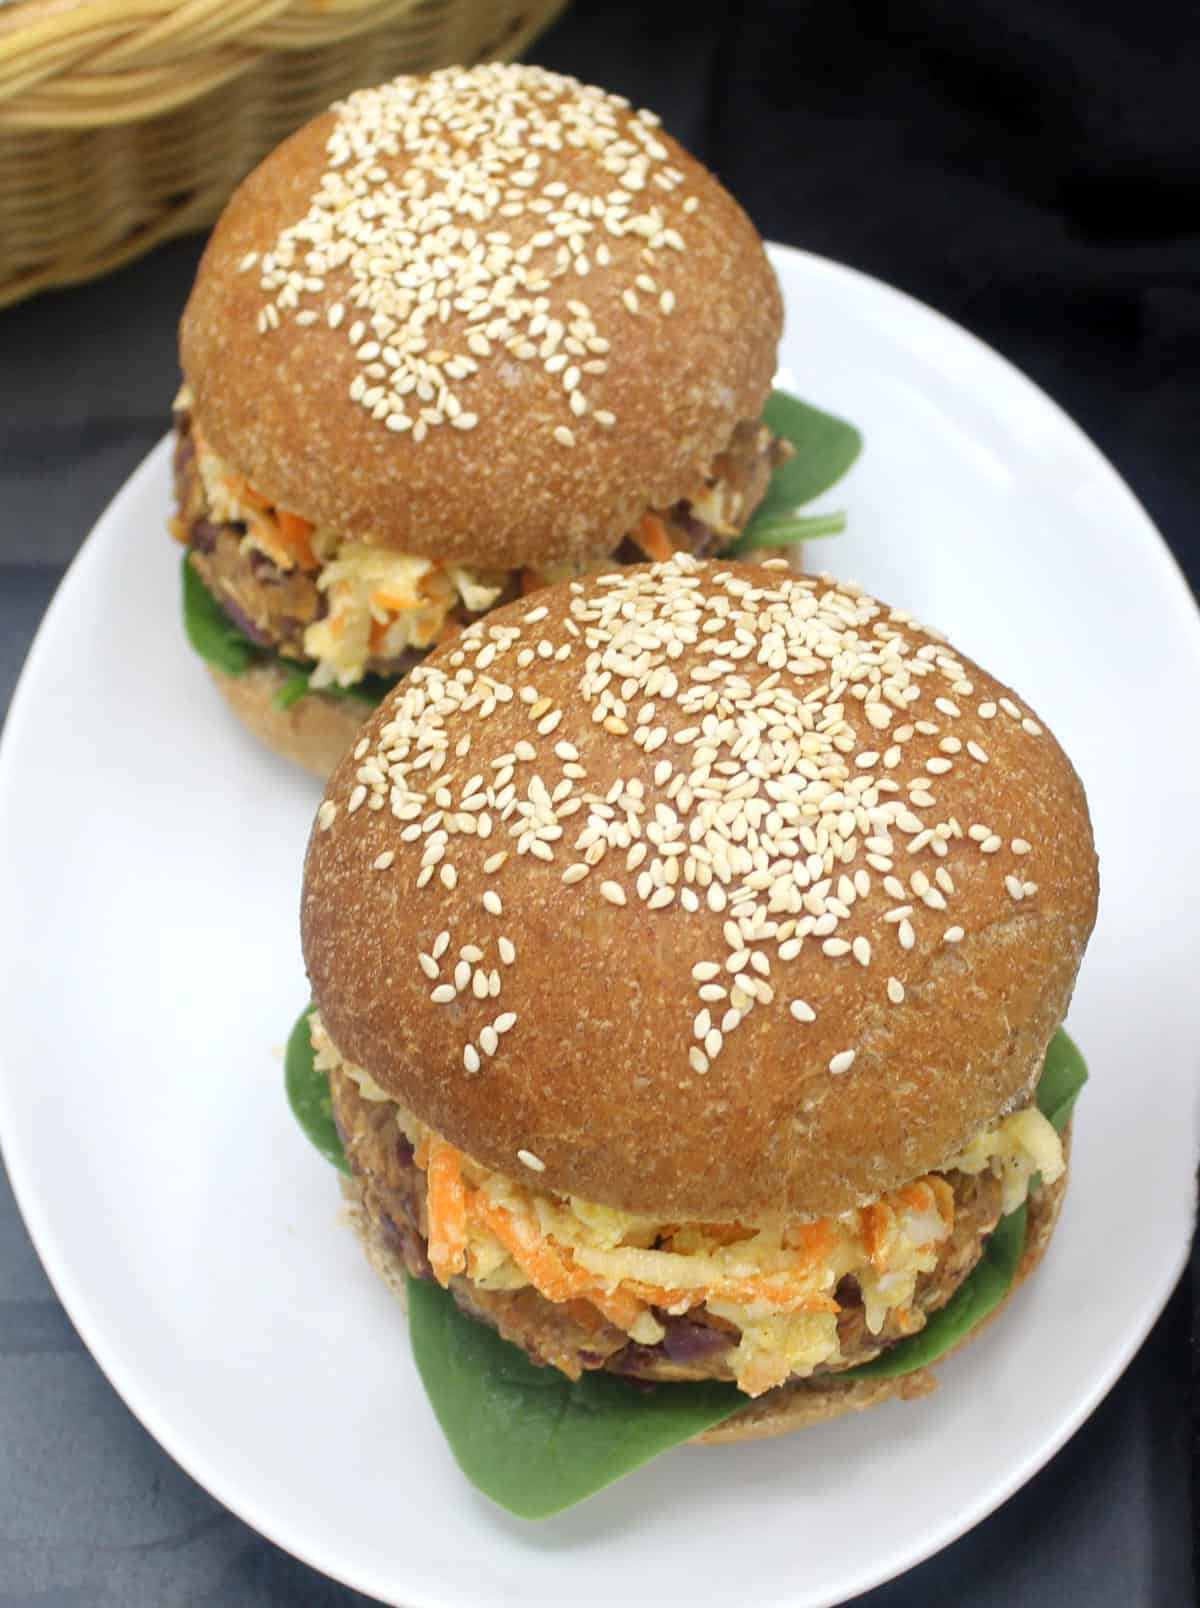 Photo of two vegan veggie burgers made with whole wheat burger buns on a white plate.